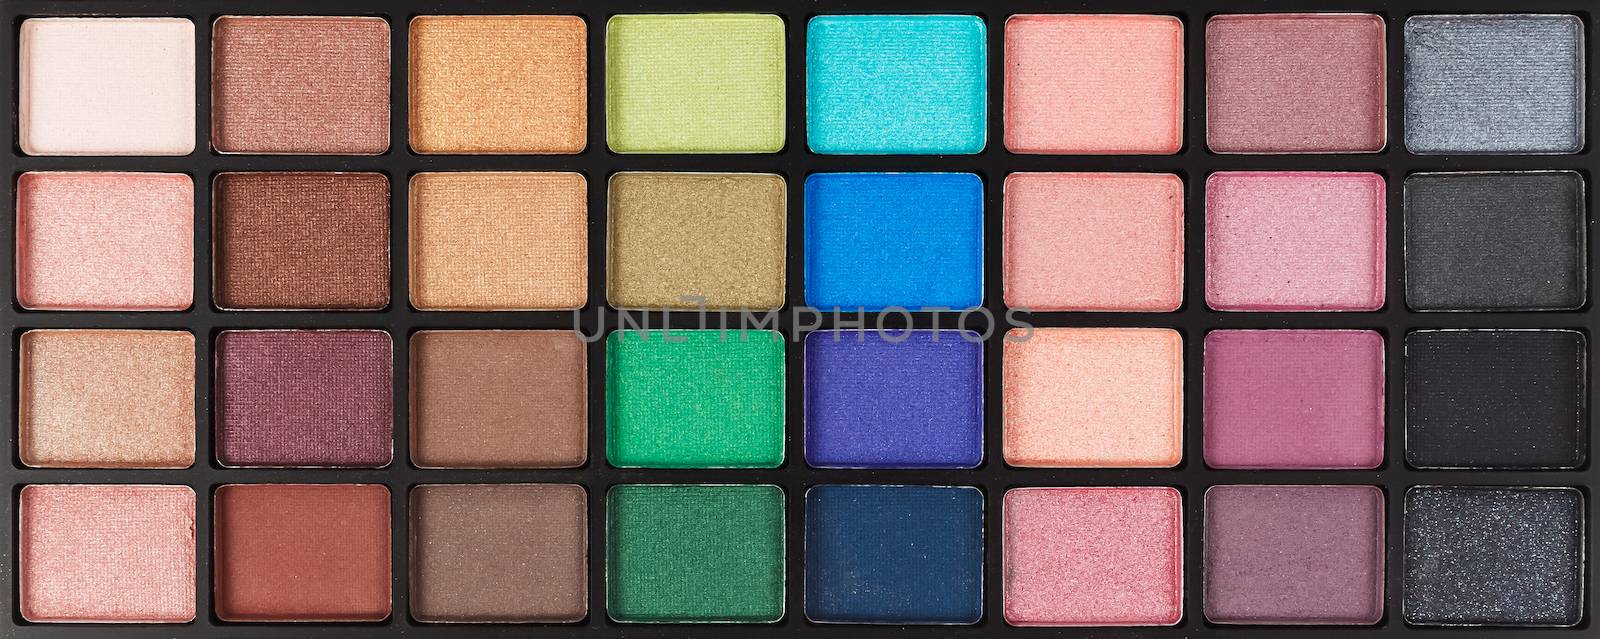 colorful cosmetic eyeshadow palette set and makeup